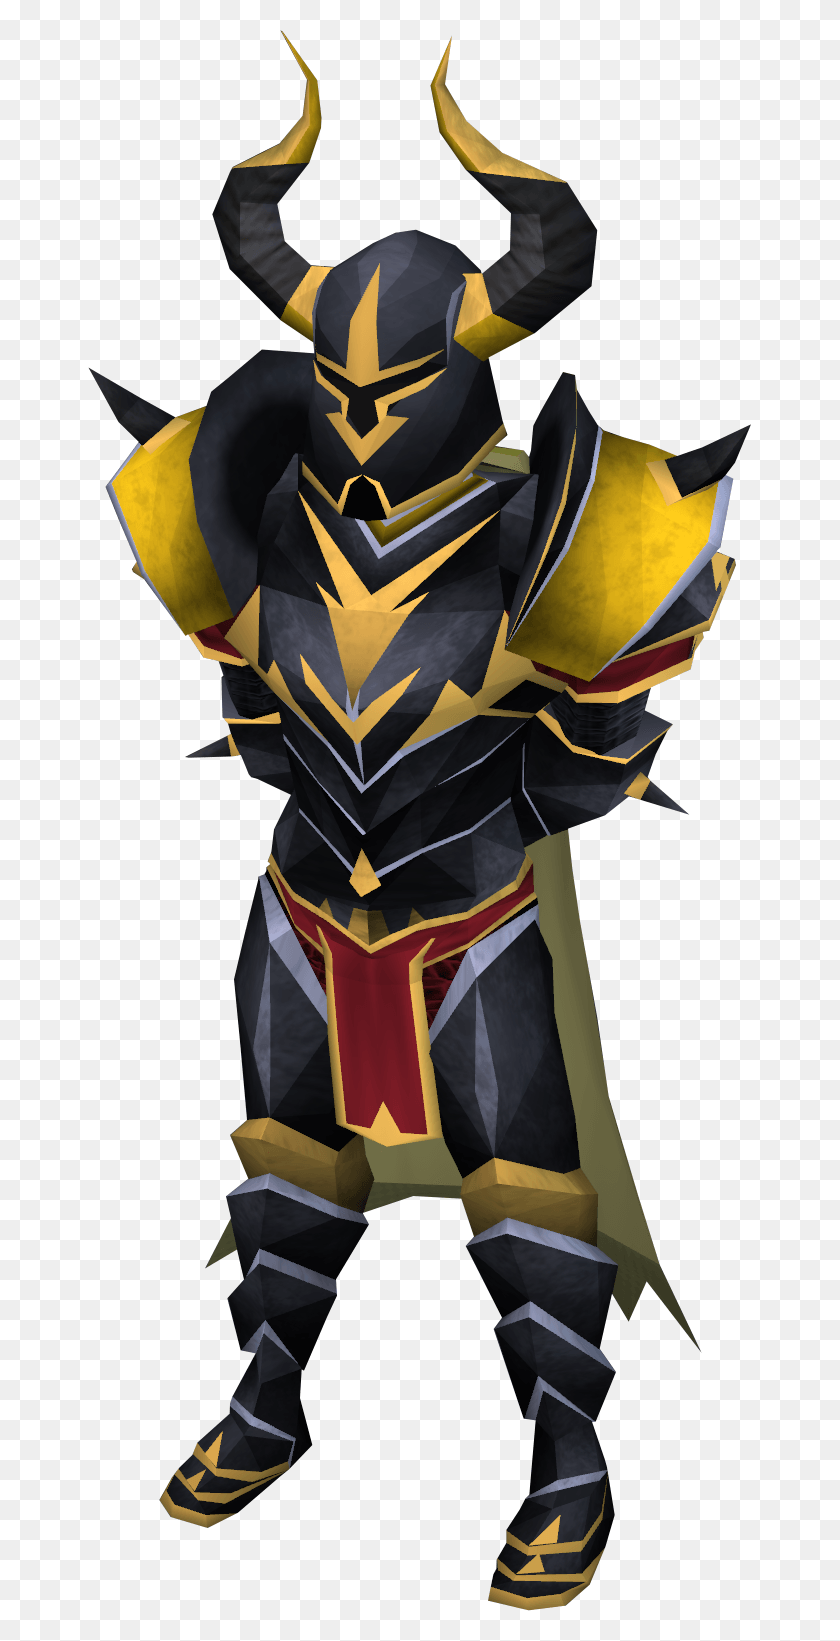 663x1581 Runescape, Apidae, Abeja, Insecto Hd Png